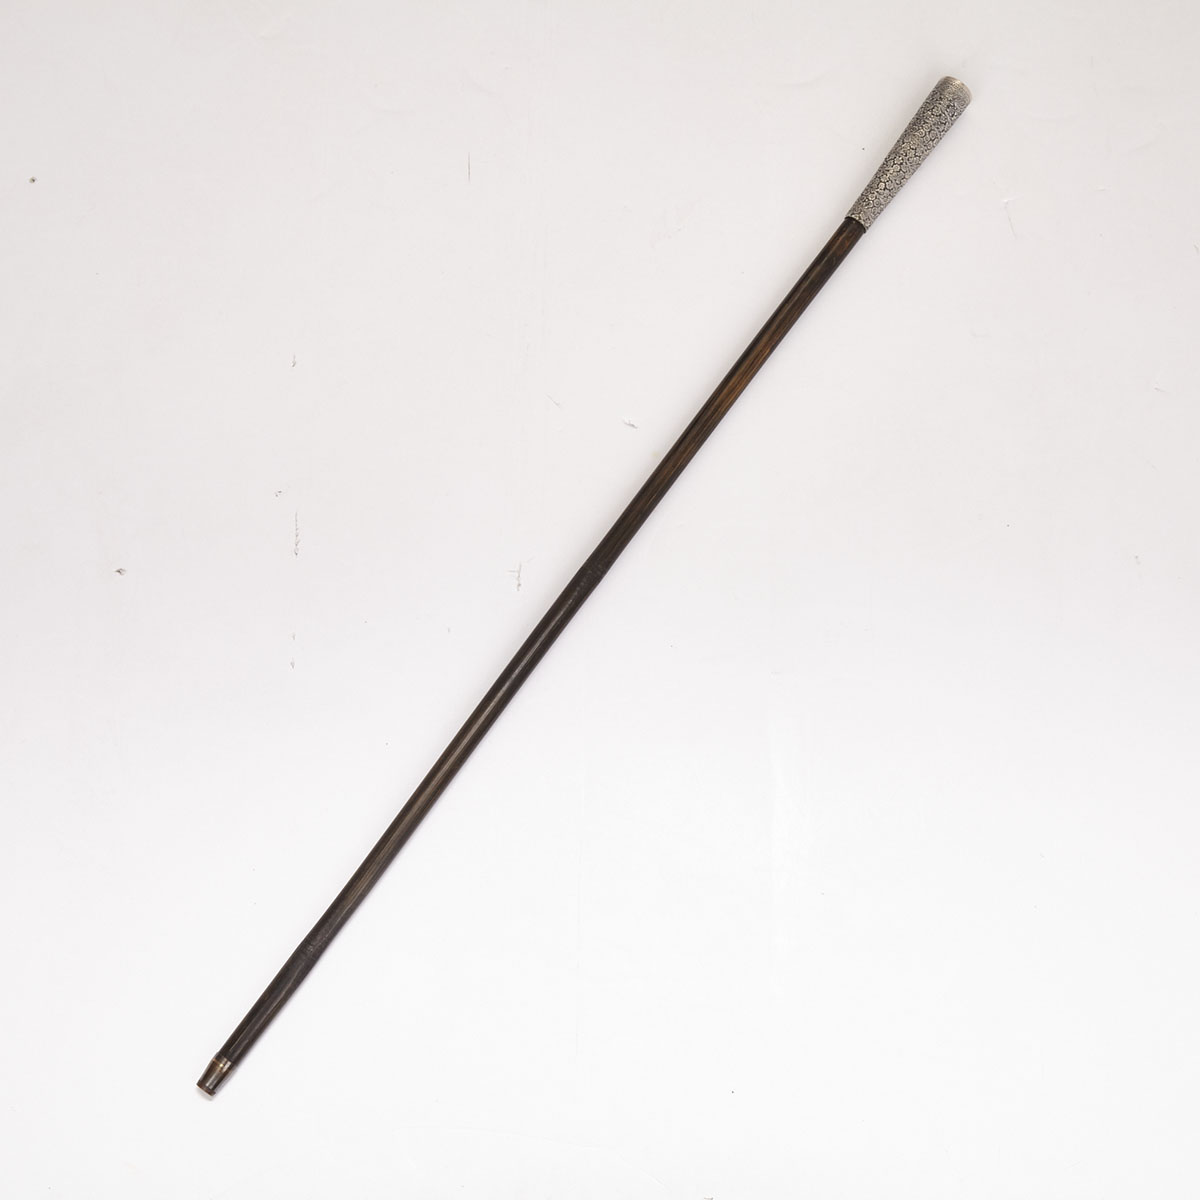 Anglo Indian Silver Mounted Bamboo Sword Gadget Cane, 19th century